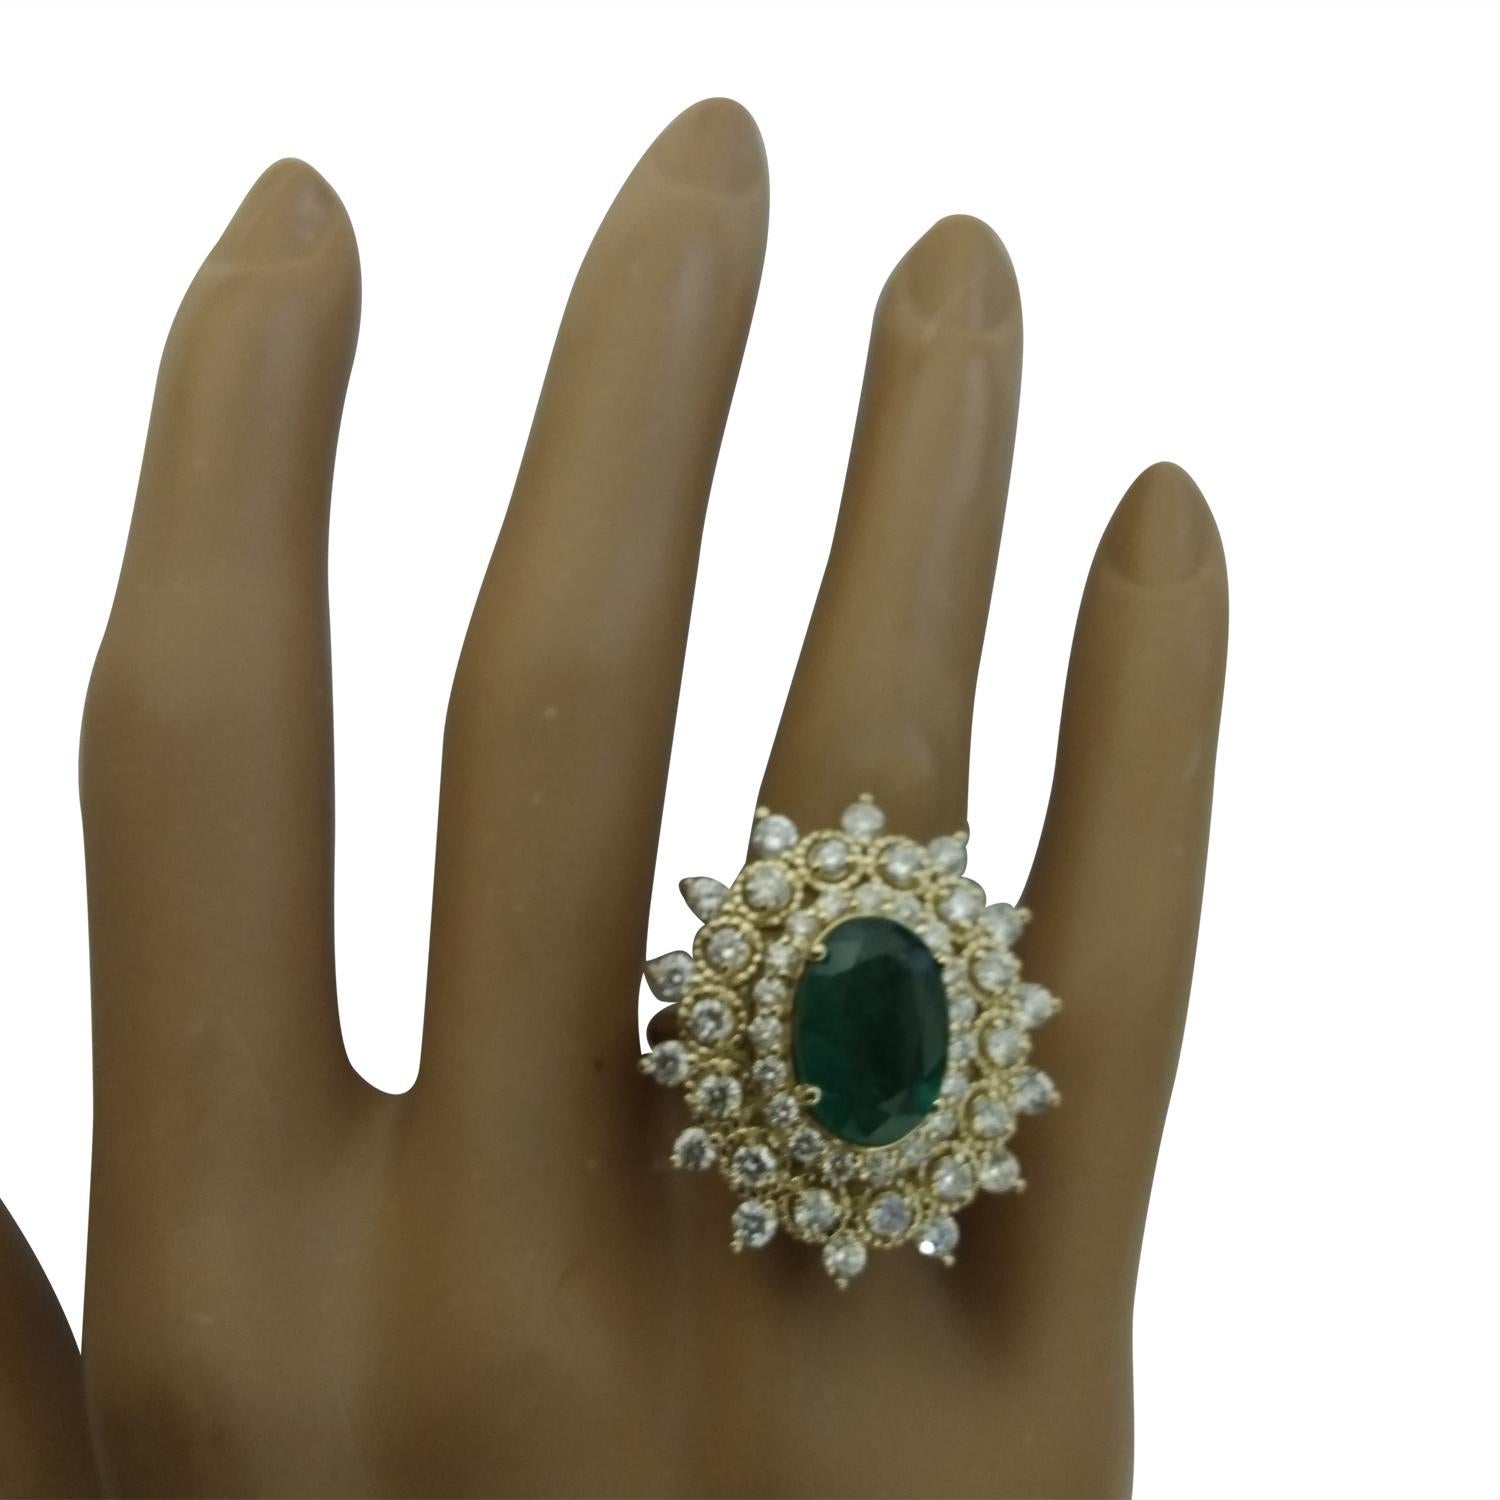 7.15 Carat Natural Emerald 14 Karat Solid Yellow Gold Diamond Ring
Stamped: 14K 
Ring Size 7
Total Ring Weight: 9.2 Grams 
Emerald Weight 5.30 Carat (12.00x10.00 Millimeters)
Natural Emerald Treatment: Oil Only
Diamond Weight: 1.85 Carat (F-G Color,